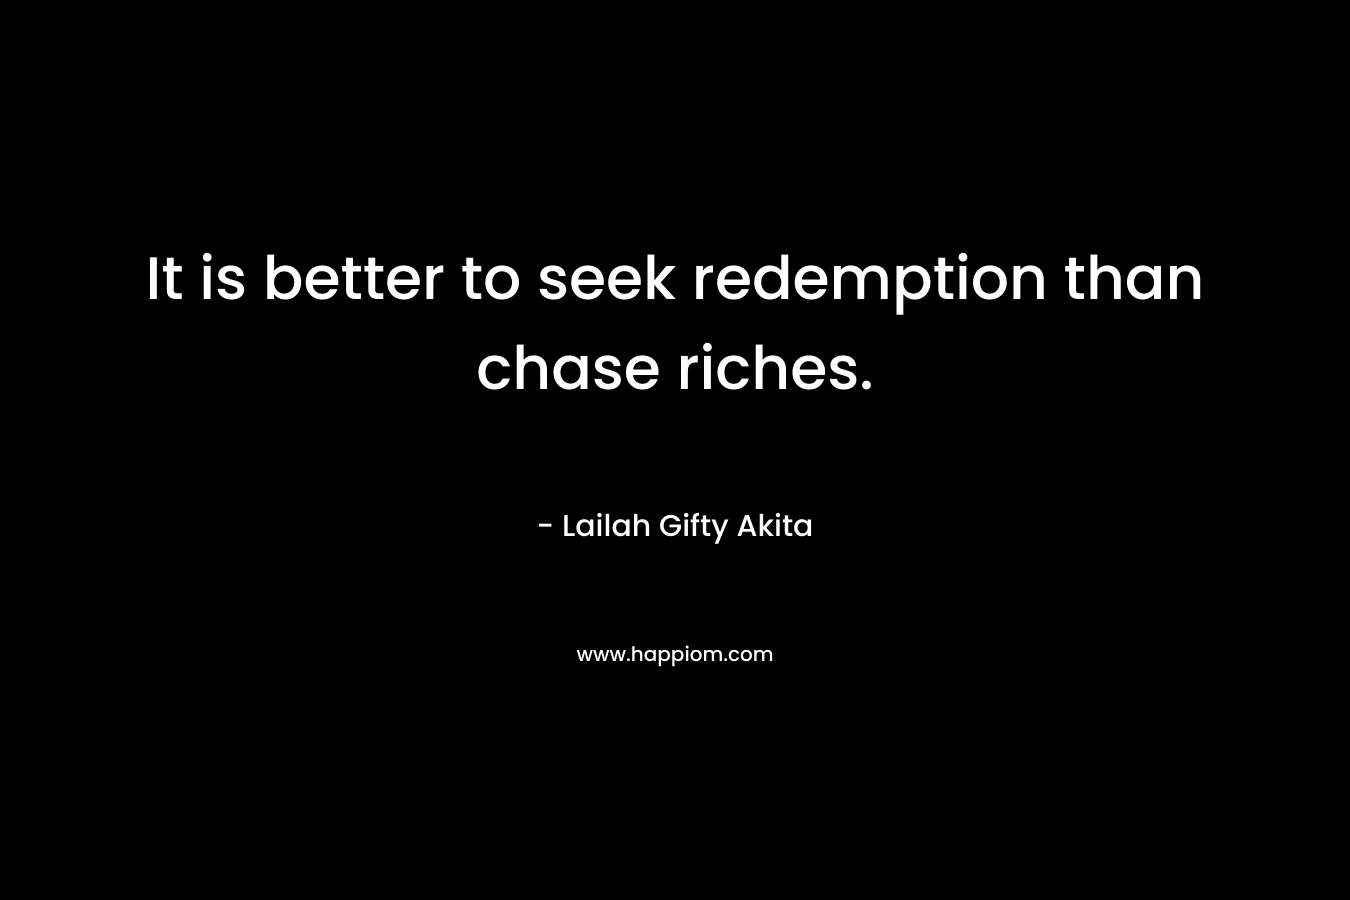 It is better to seek redemption than chase riches.